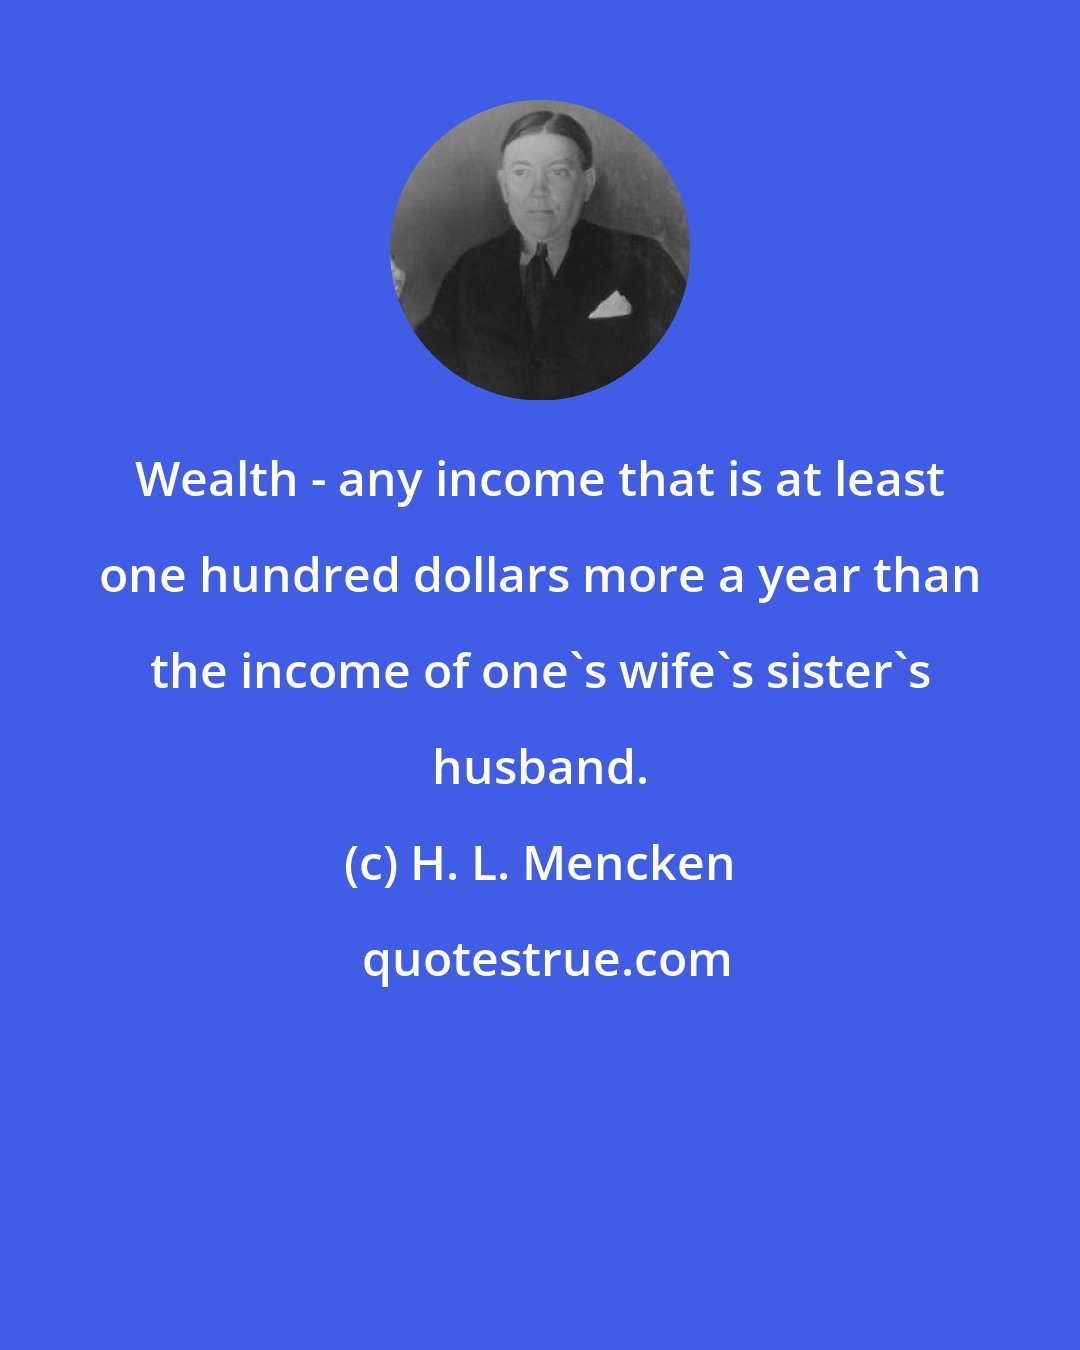 H. L. Mencken: Wealth - any income that is at least one hundred dollars more a year than the income of one's wife's sister's husband.